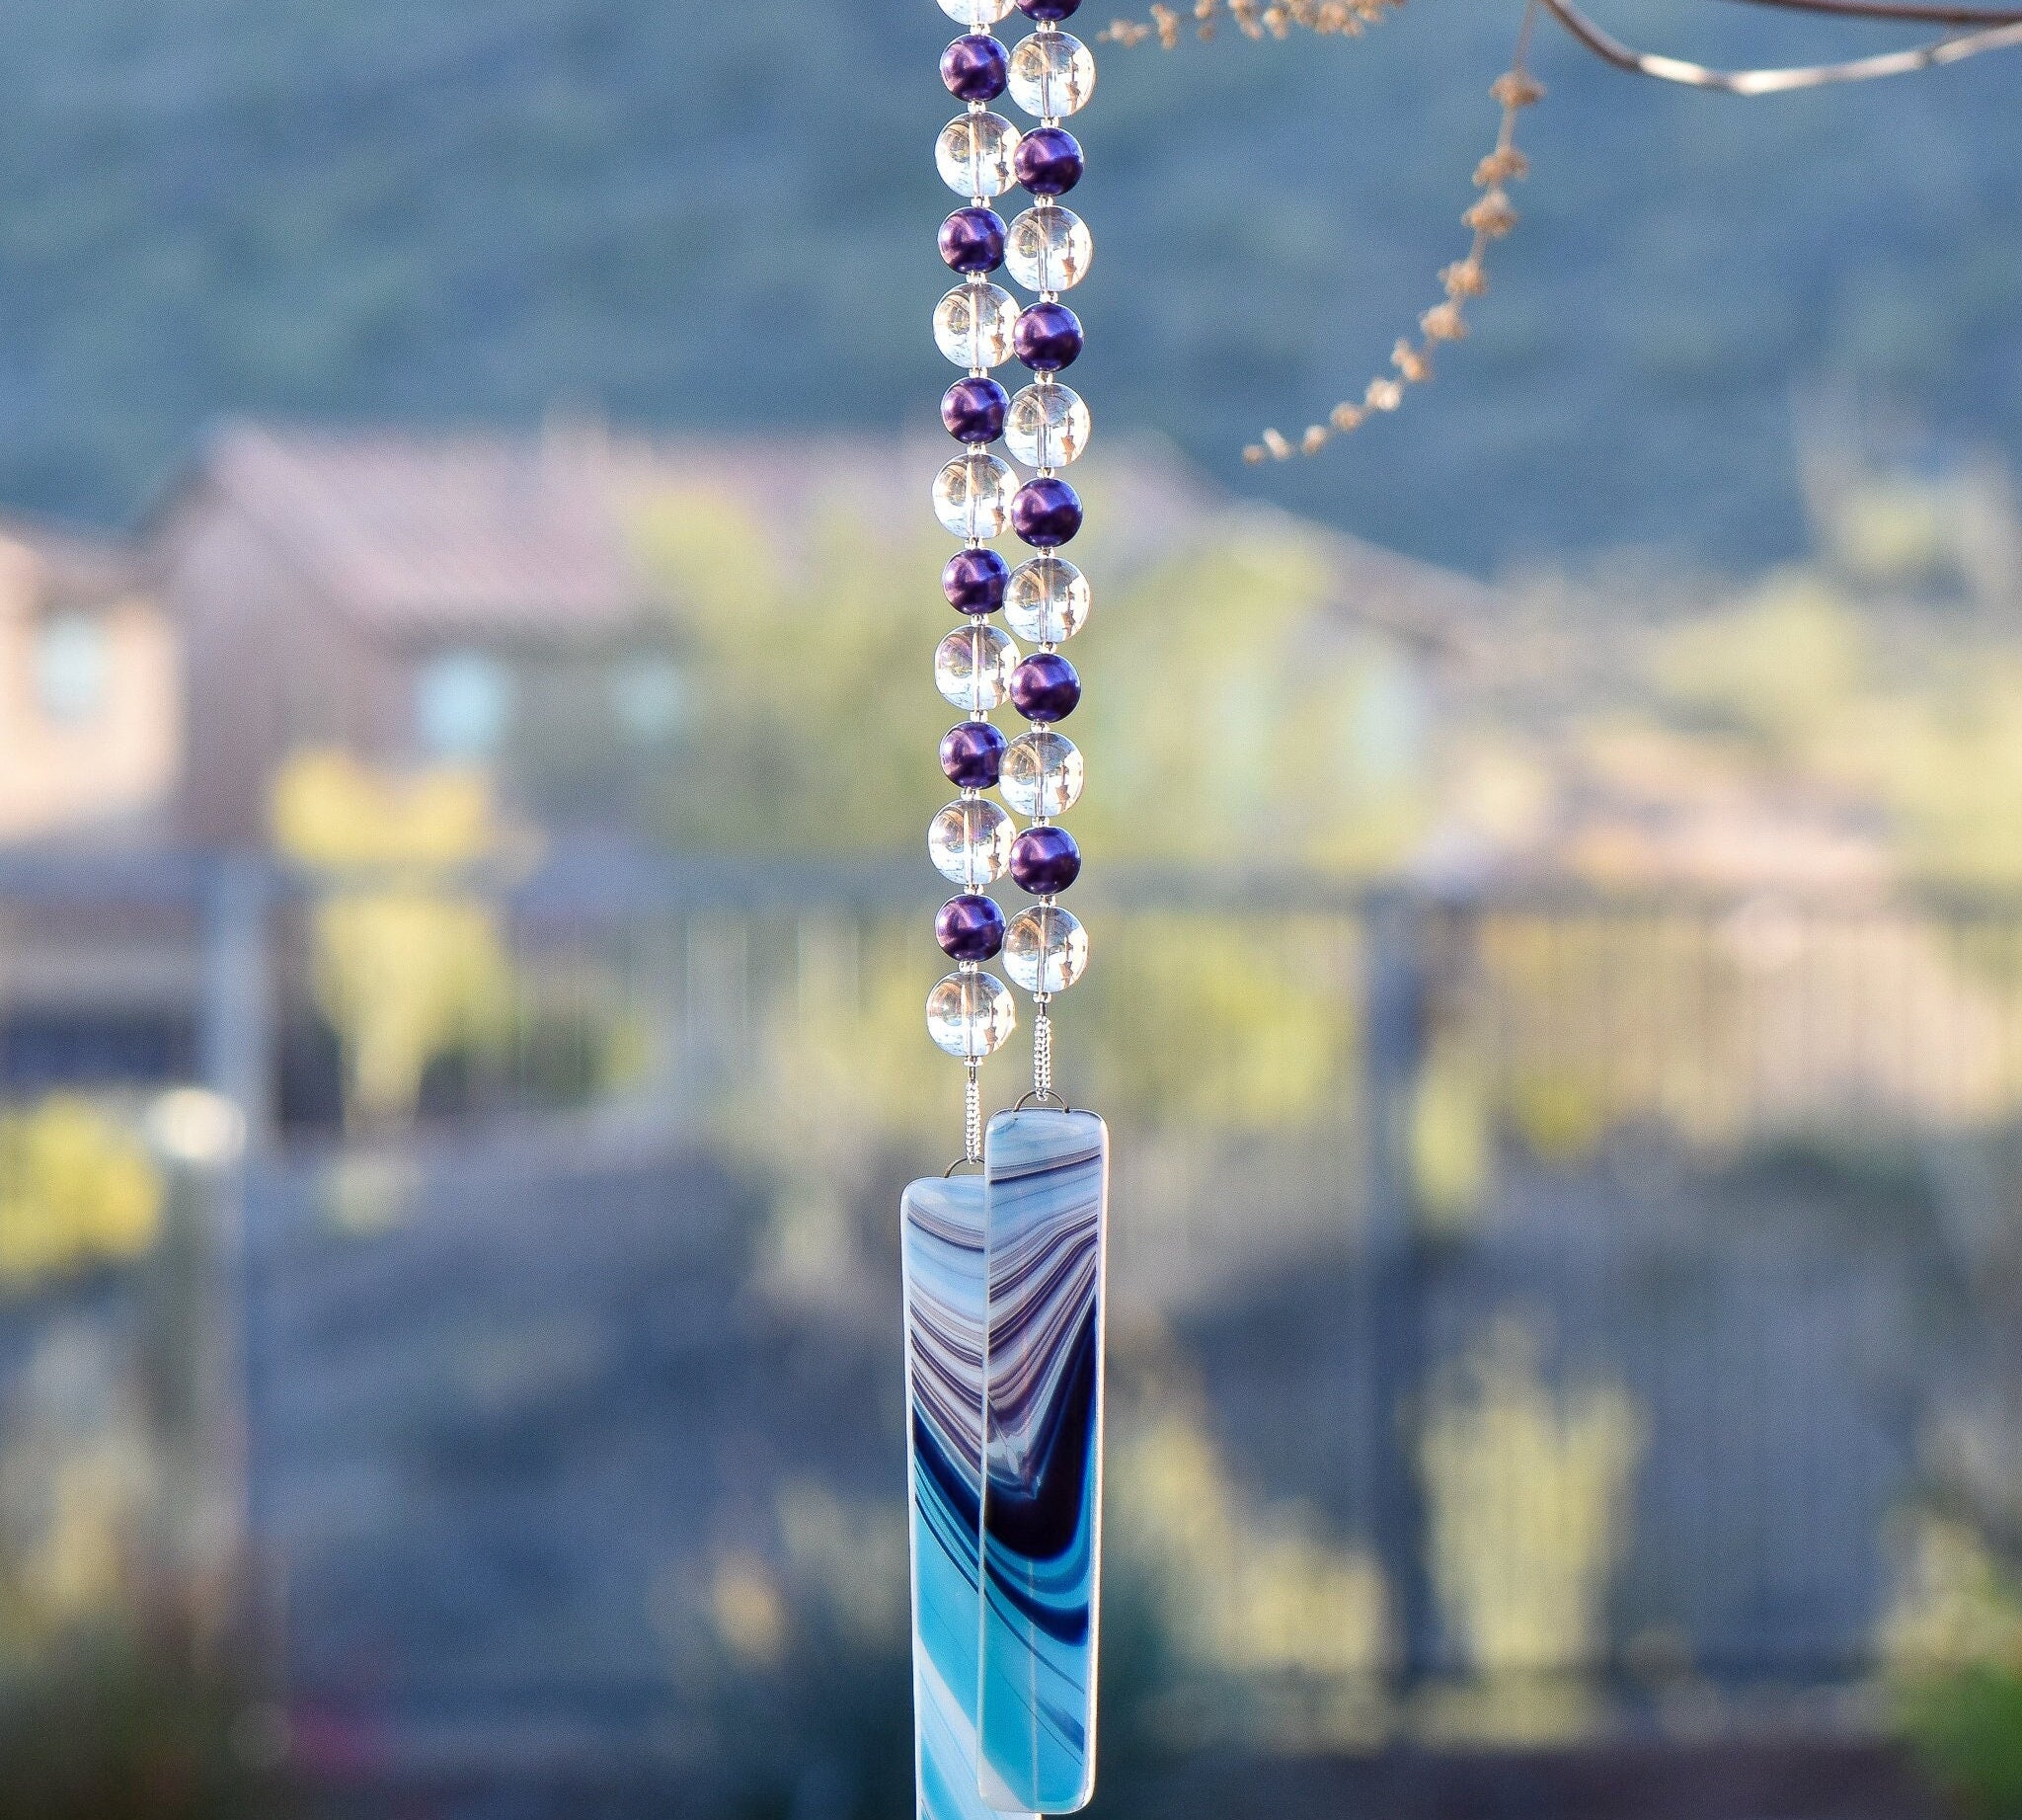 Purple Pearl Glass Sun-Catching Wind Chime for Patio, Balcony, Garden